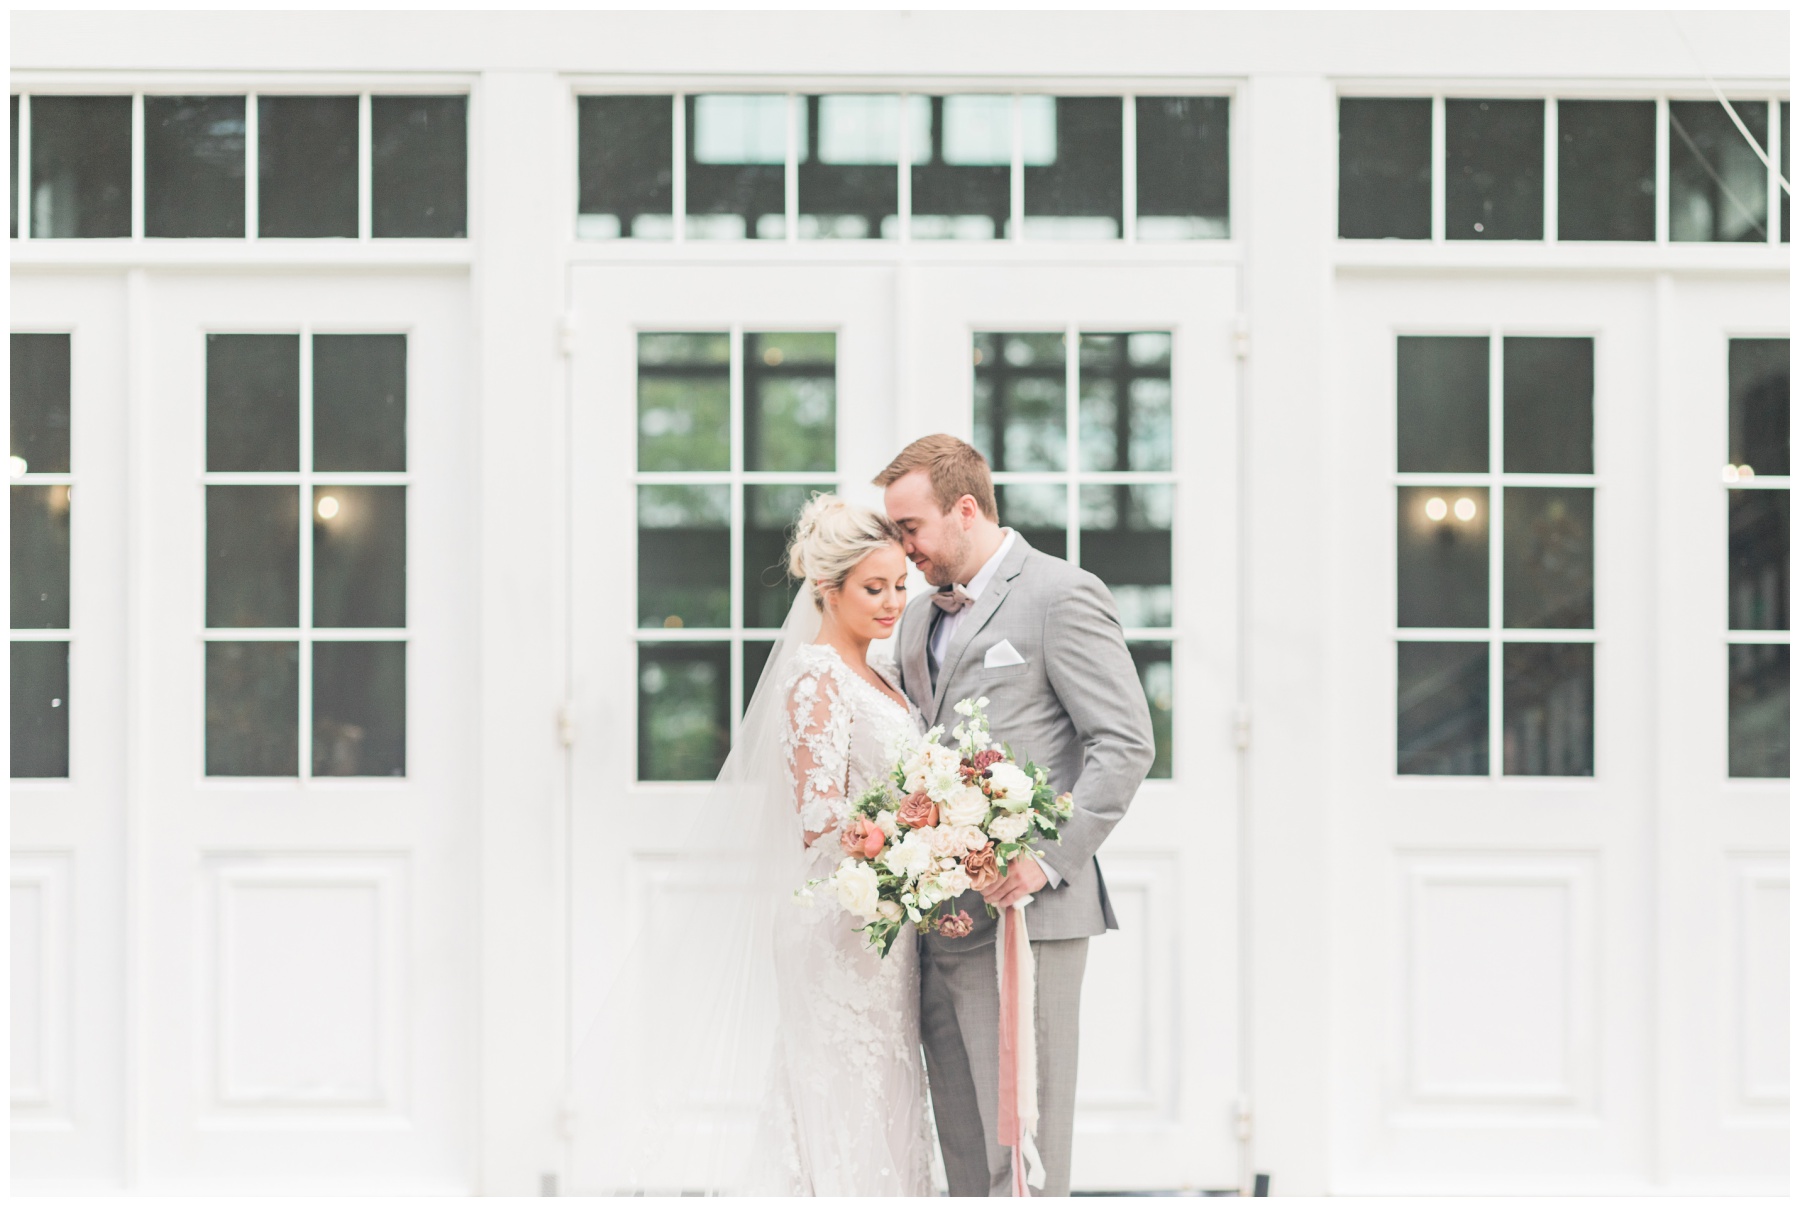 Bride in a lace gown with scalloped edges and long sleeves